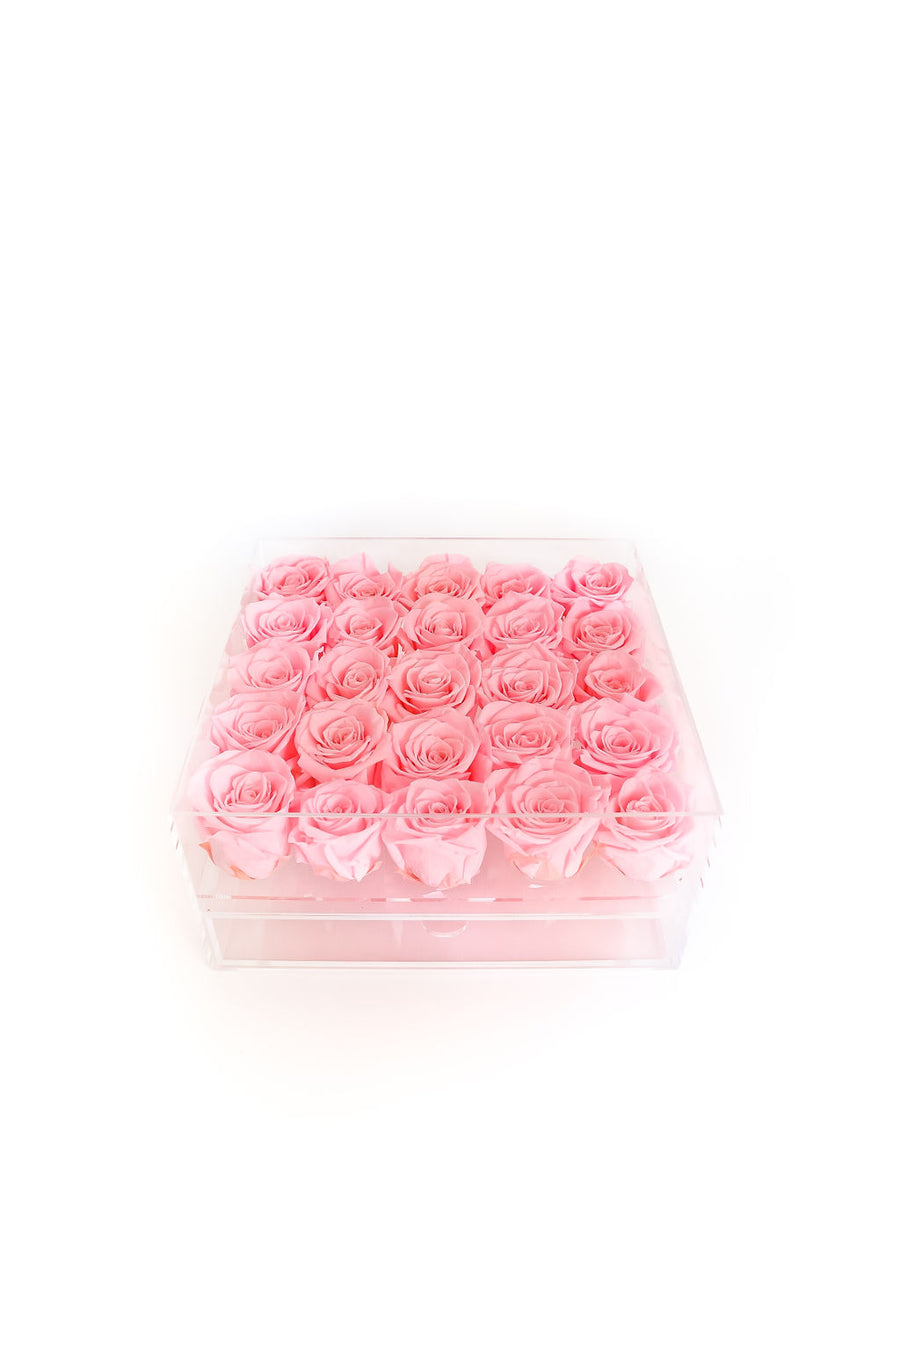 PINK 25 PRESERVED ROSES